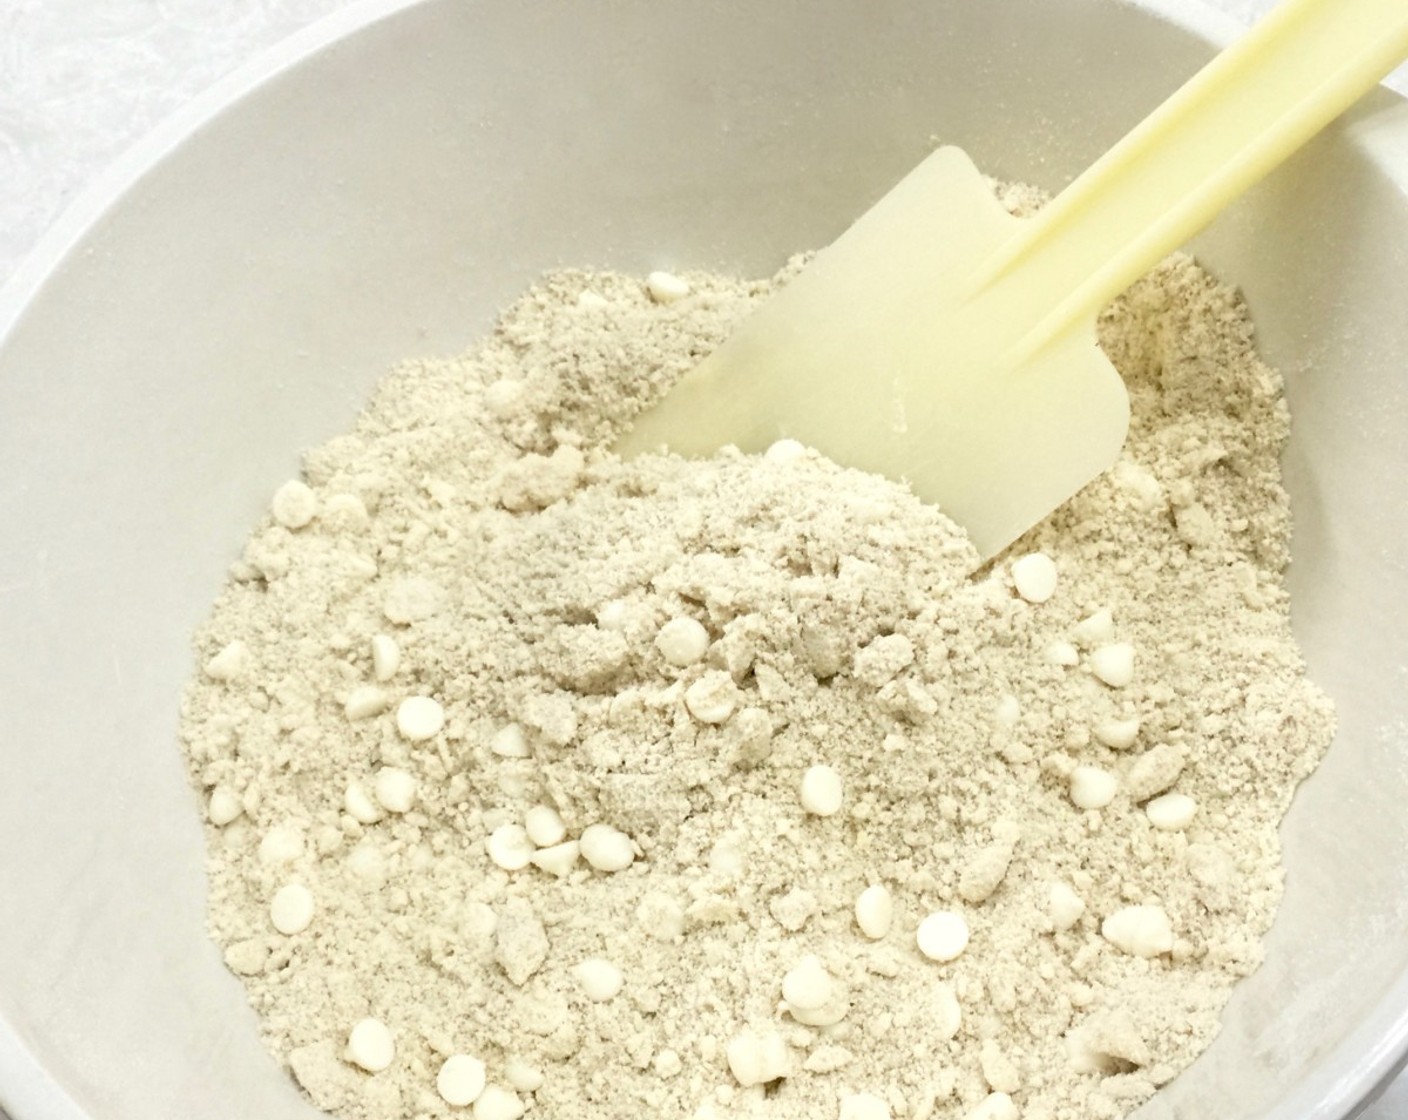 step 11 Mix the white chocolate into the coarse Breadcrumbs (1 cup) and set aside while we prepare the wet ingredients.